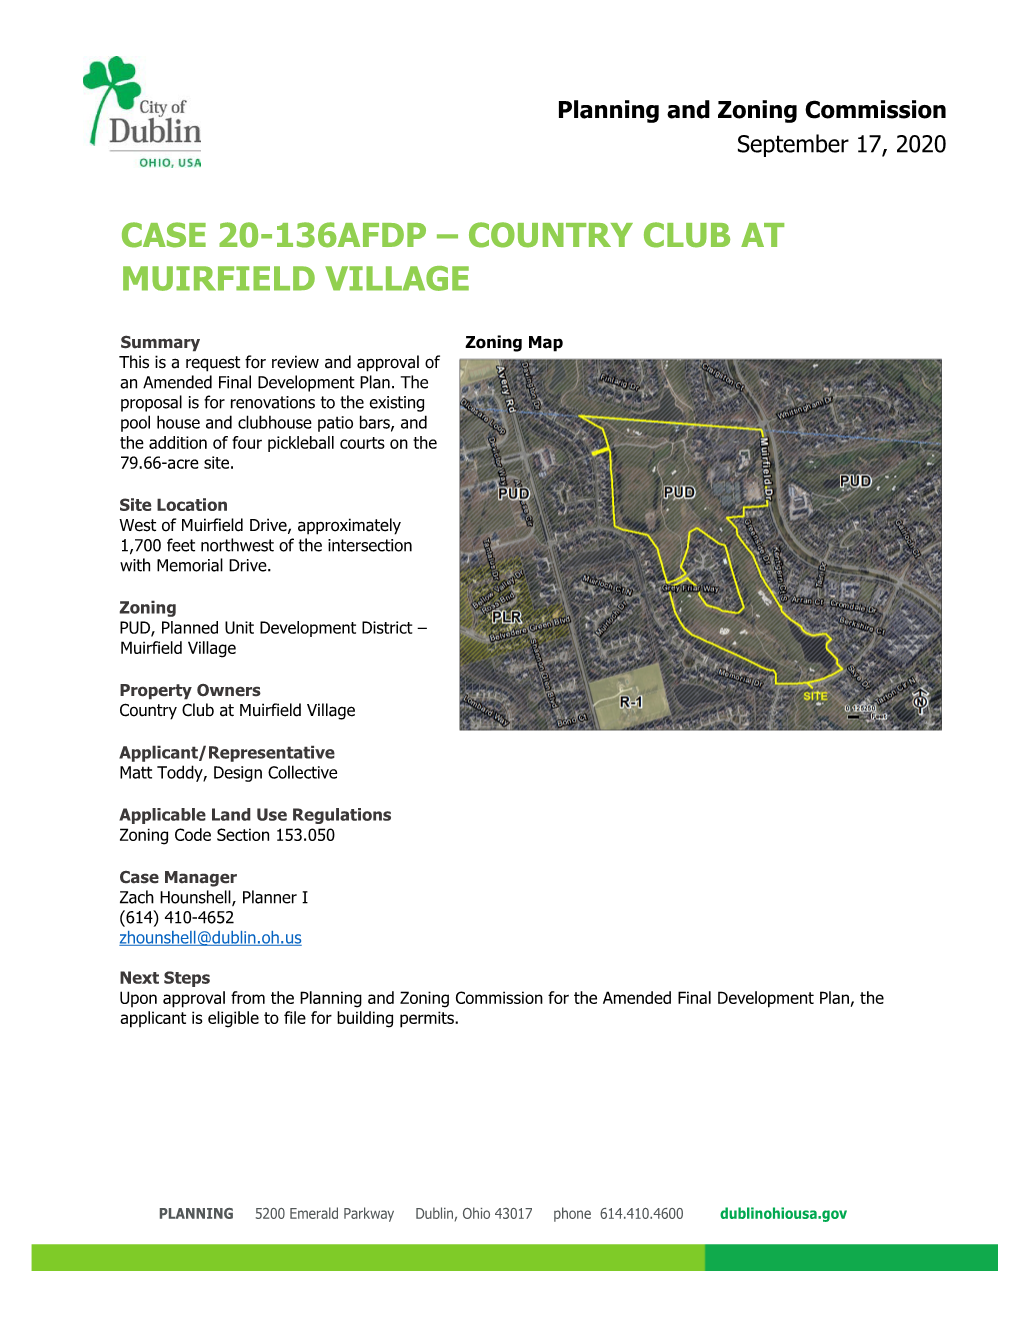 Case 20-136Afdp – Country Club at Muirfield Village